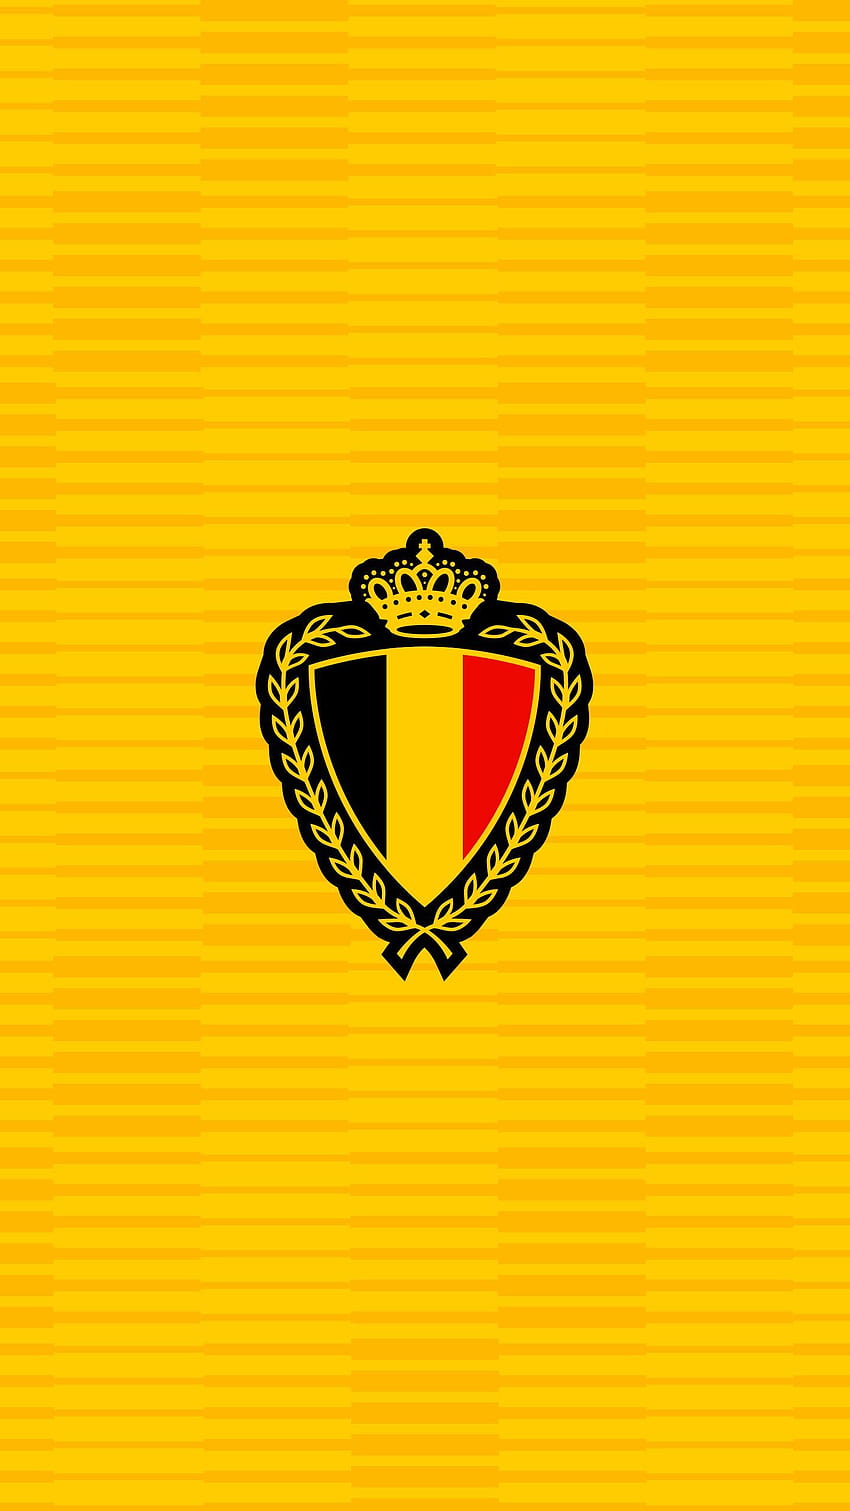 Belgian Red Devils based on their 2018 World Cup jersey. Red devils, Belgium national football team, Manchester united team, Belgium Soccer HD phone wallpaper